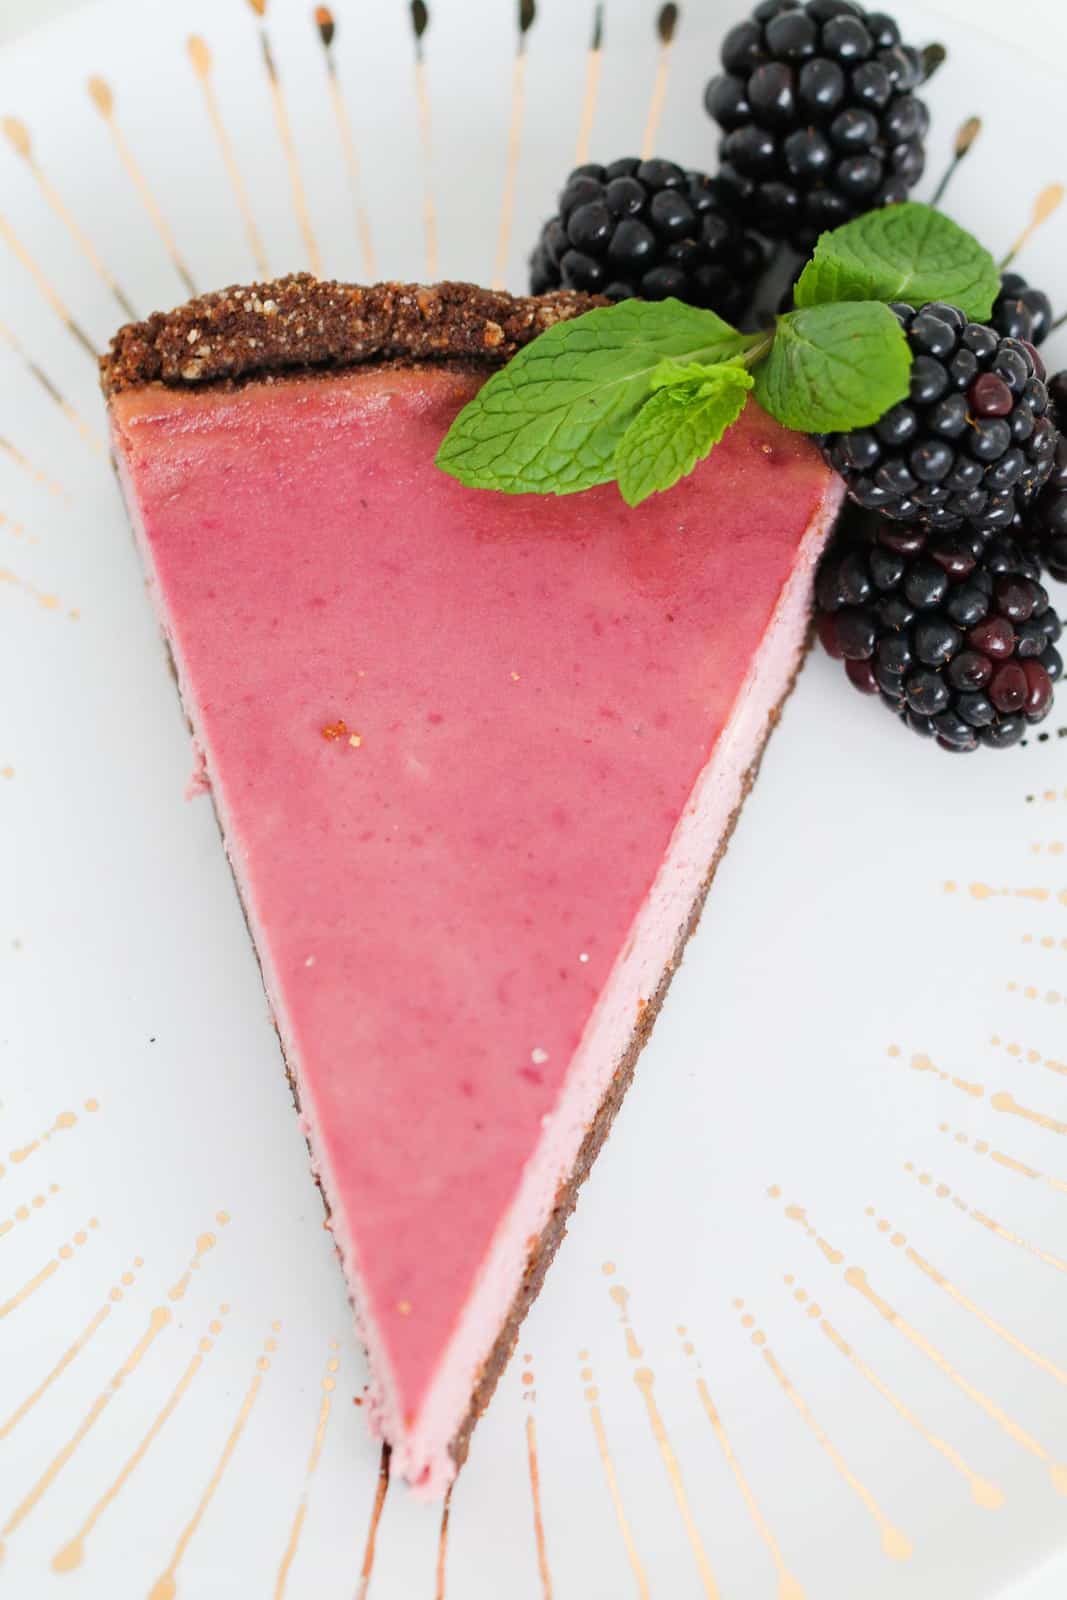 A slice of blackberry cheesecake.